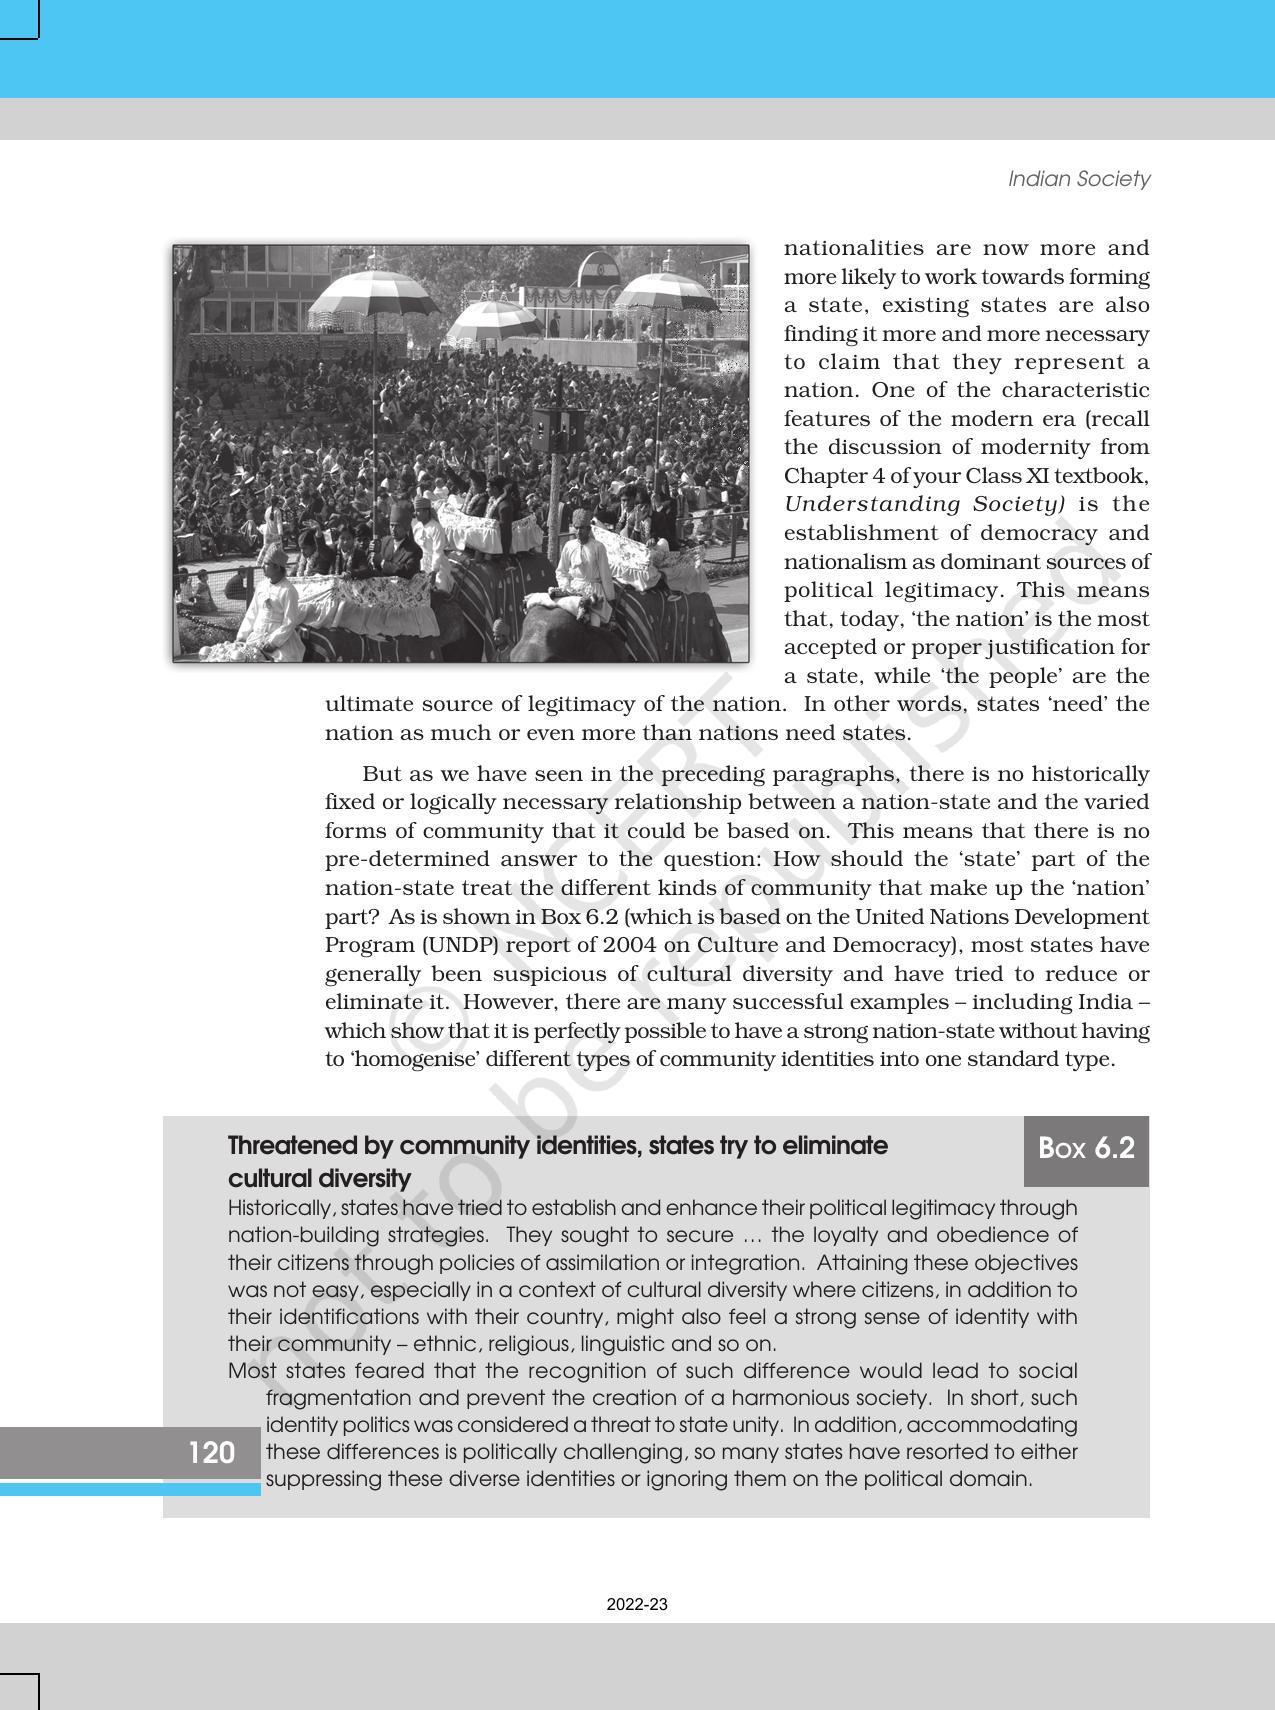 NCERT Book for Class 12 Sociology (Indian Society) Chapter 6 The Challenges of Cultural Diversity - Page 8